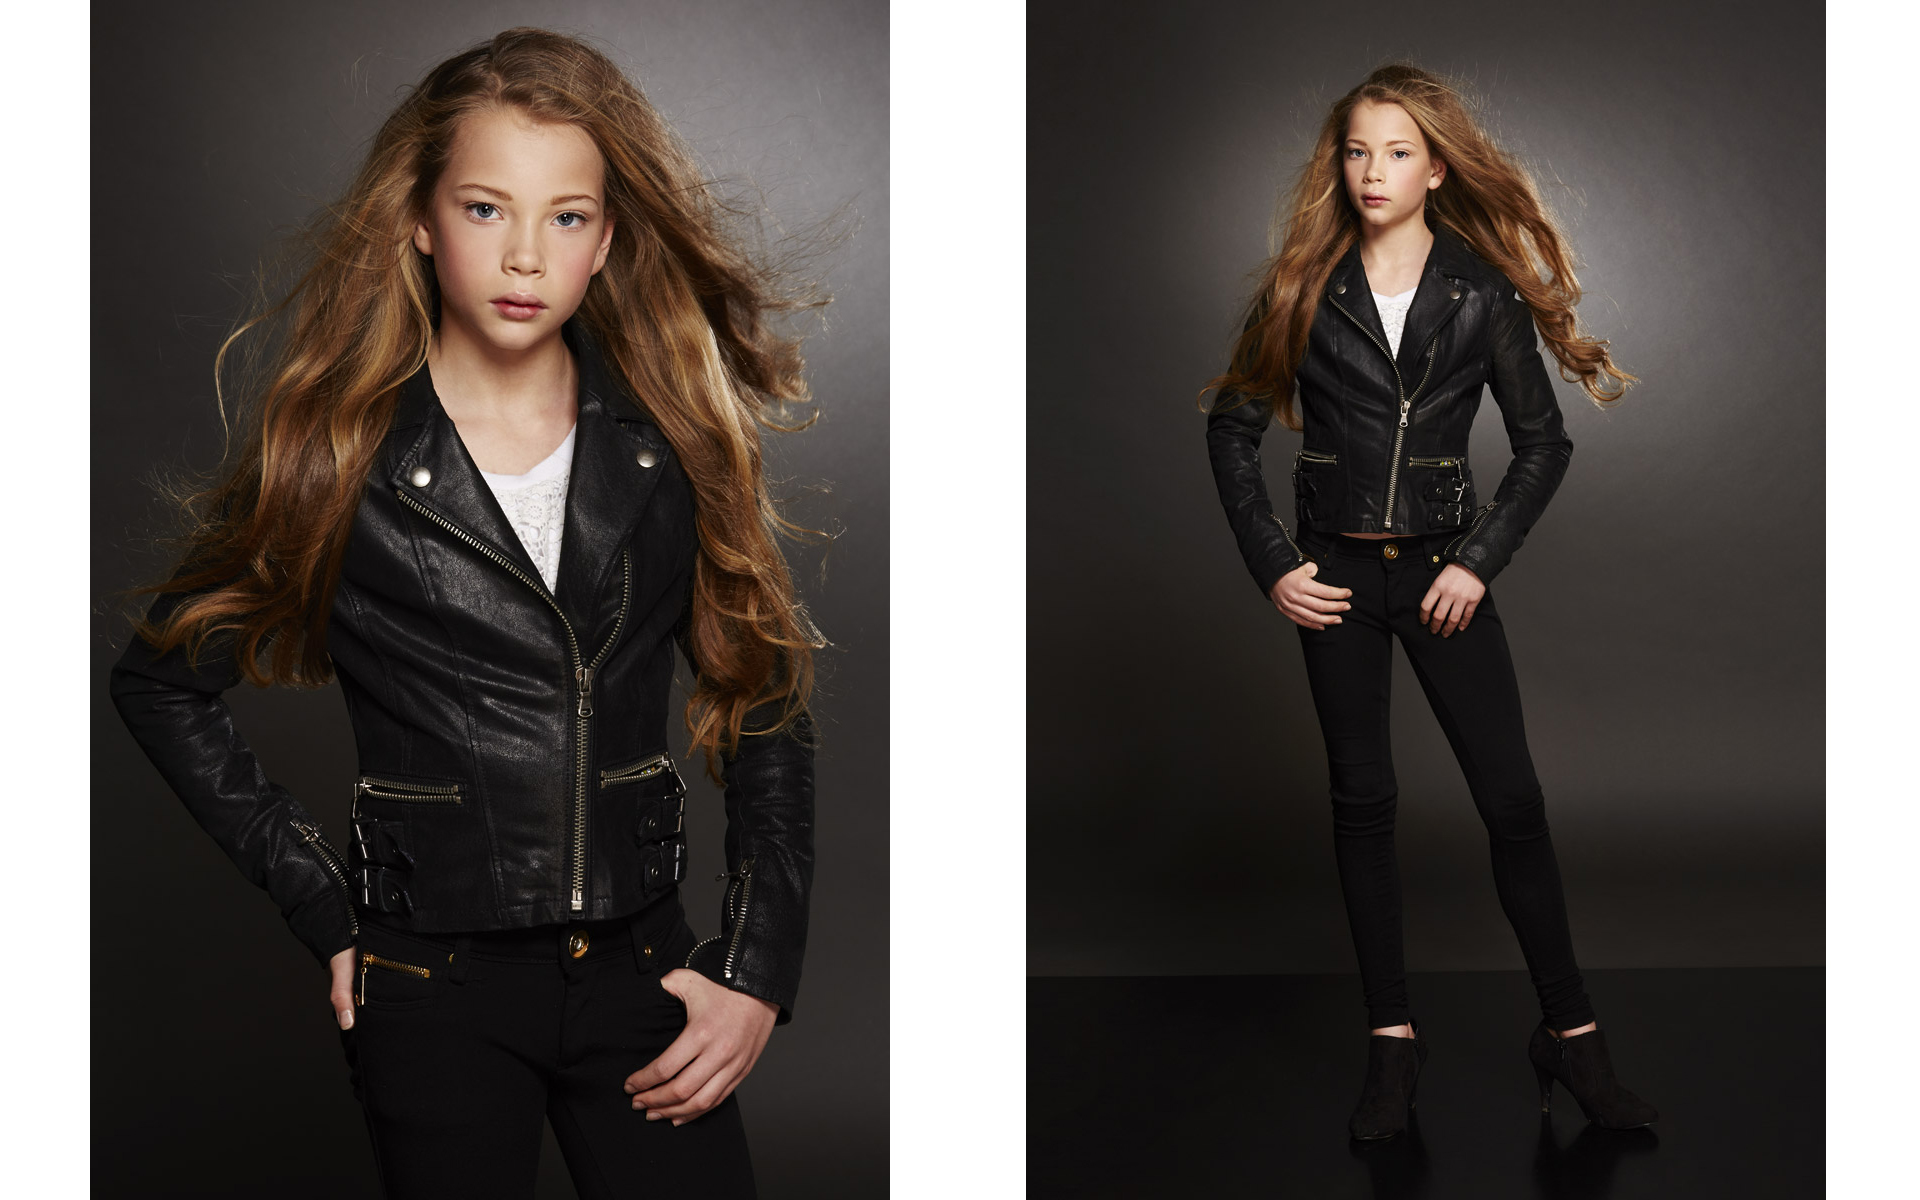 Teenage model with blonde hair wearing black leather jacket in front of dark grey backdrop on a brand fashion photo shoot